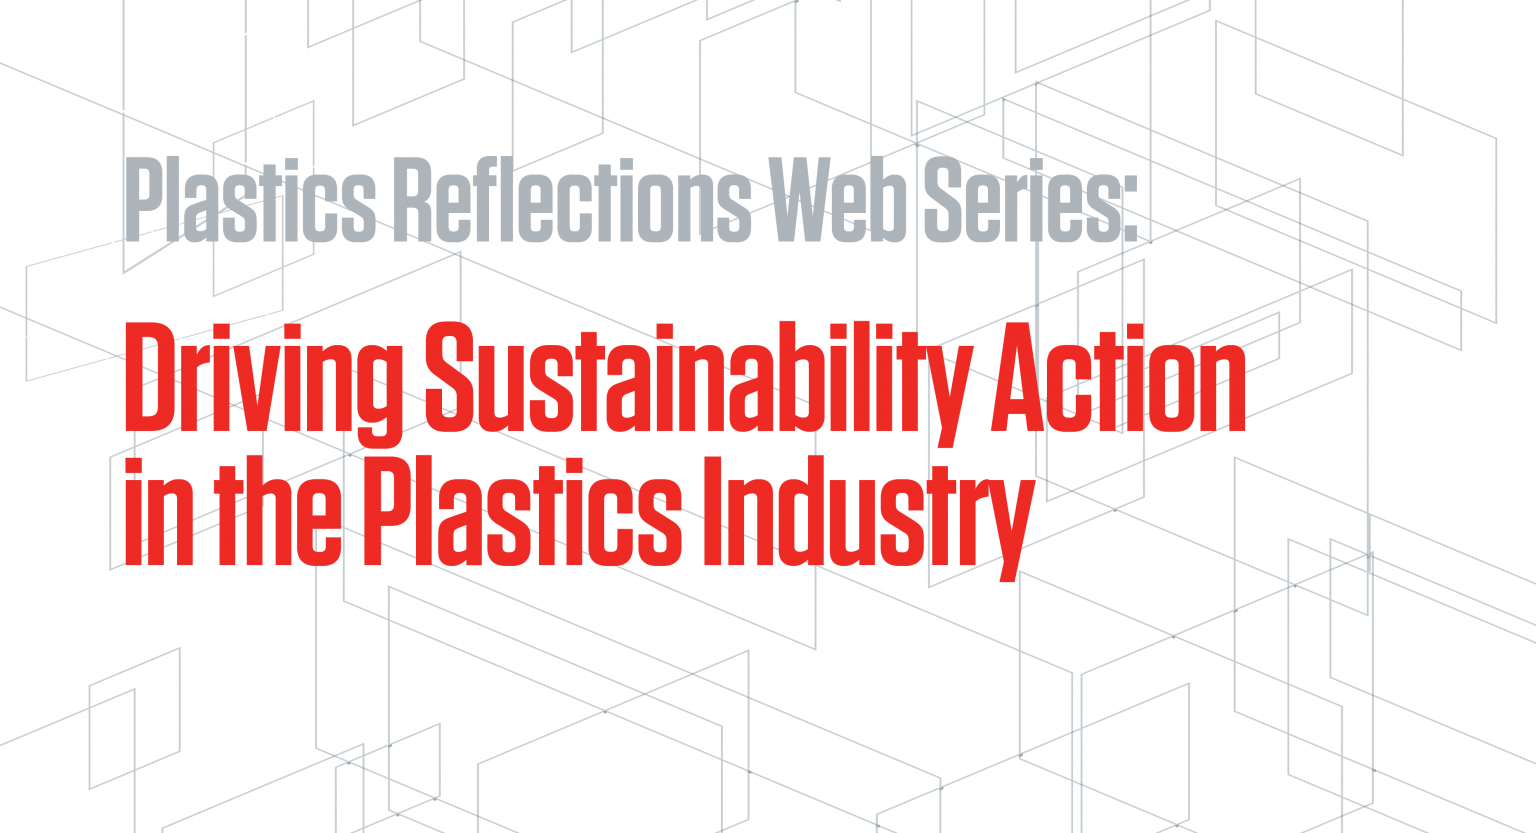 Plastics Reflections Web Series Driving Sustainability Action in the Plastics Industry